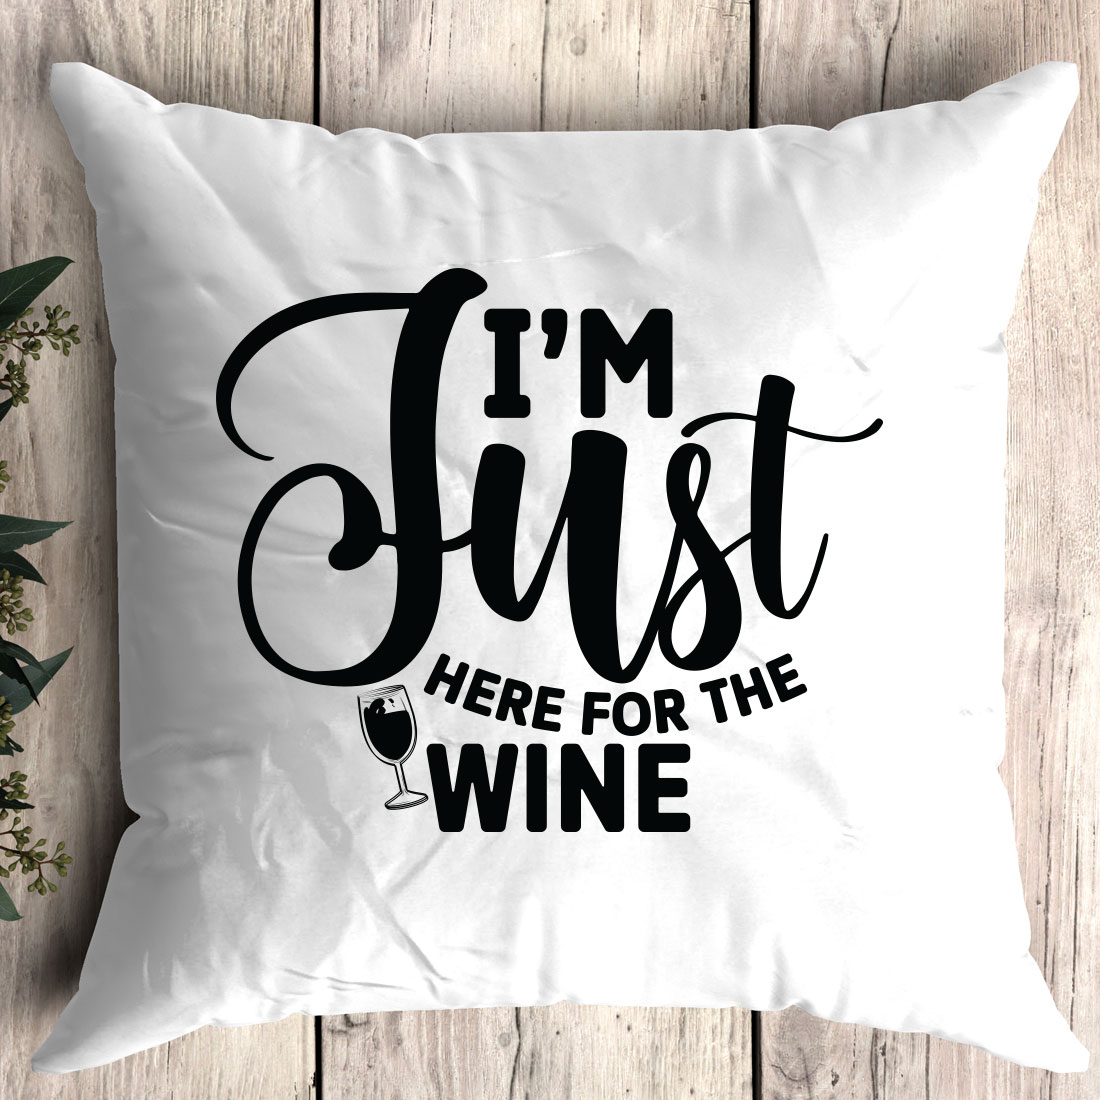 Pillow that says i'm just here for the wine.